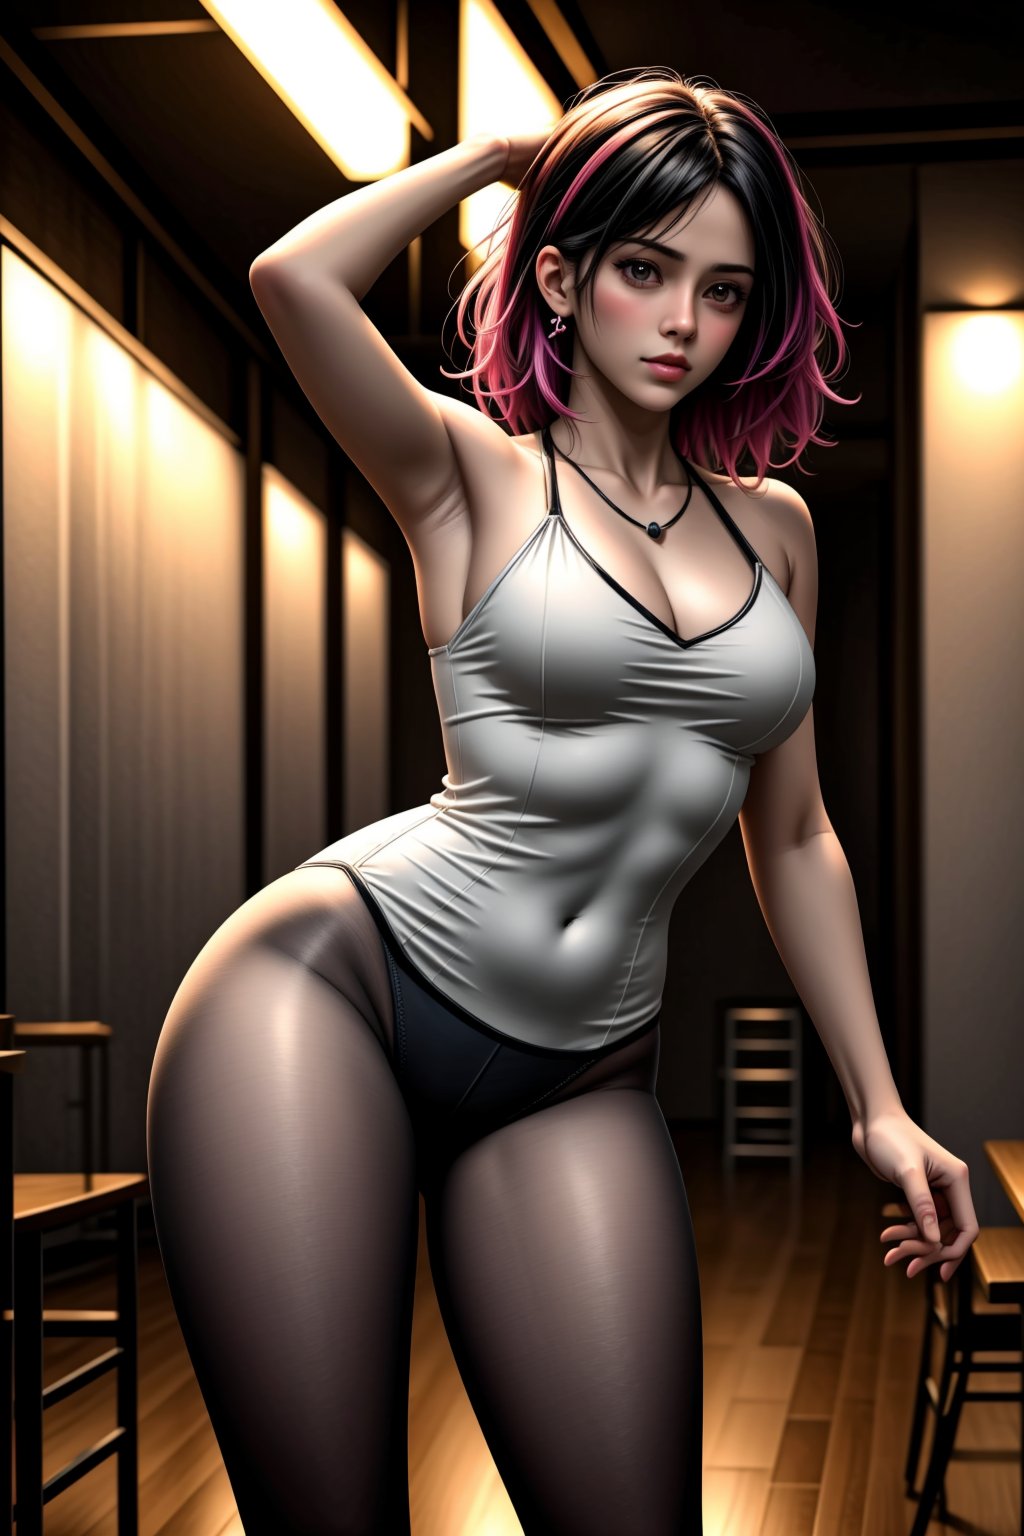 (((dating-pov))), 1woman, Bishoujo-in-her-30s, unique-mix-of-natural-hair-styles, mix-of-natural-hair-colors, over-insanely-unique-sexy-overload, mix-of-natural-chest-sizes, realistic-detailed-skin, (((Ultra-HD-photo-same-realistic-quality-details, casual))), remarkable-colors, china dress with heart cutout, Crochet-halter-top-dress, hair-ornaments, overly-tight-dress, mesh-pantyhose, glass-like-see-through-fabric, bodycon, (((relaxed, supporting-pose))), unique-simple-background, dramatic-rim-lighting, Hyper Realistic, tutututu, Hyper, BOTTOM VIEW,<lora:659111690174031528:1.0>